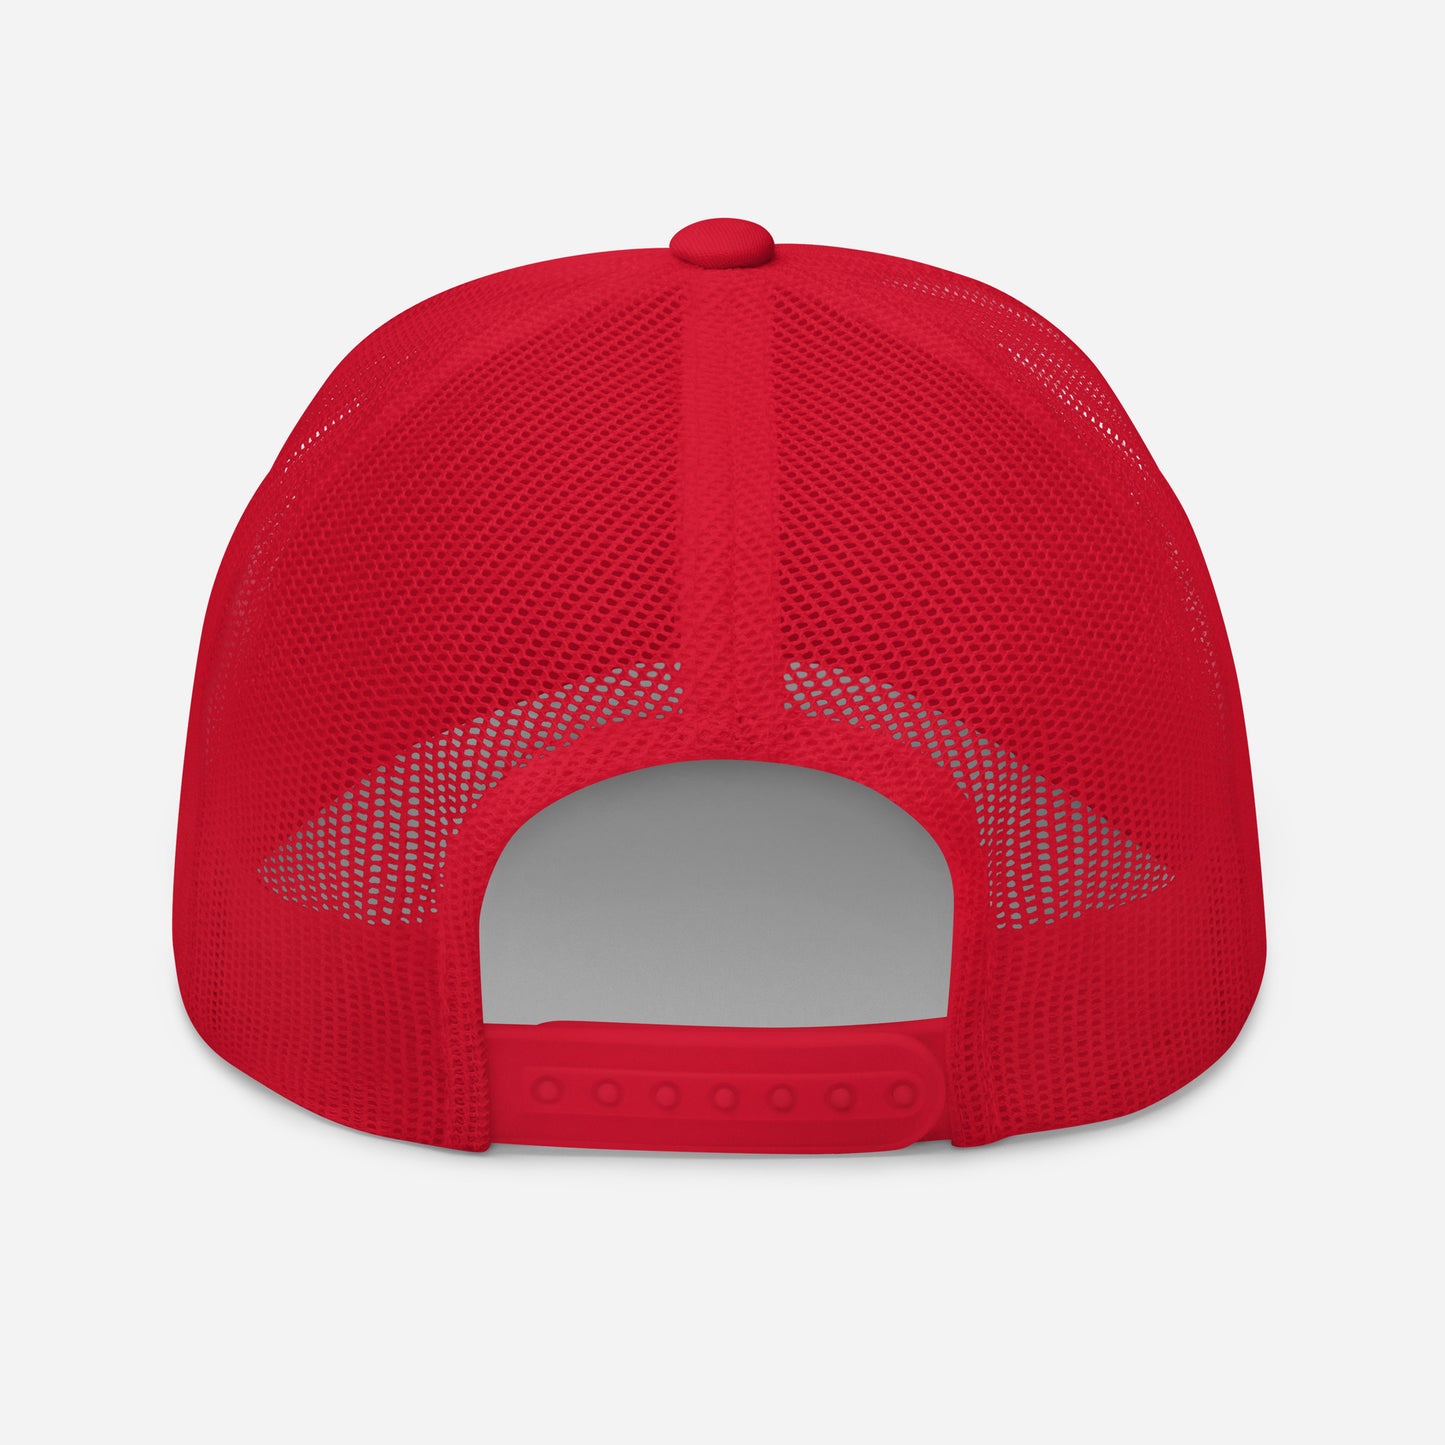  cap-from-the-back-with-swiss-flag